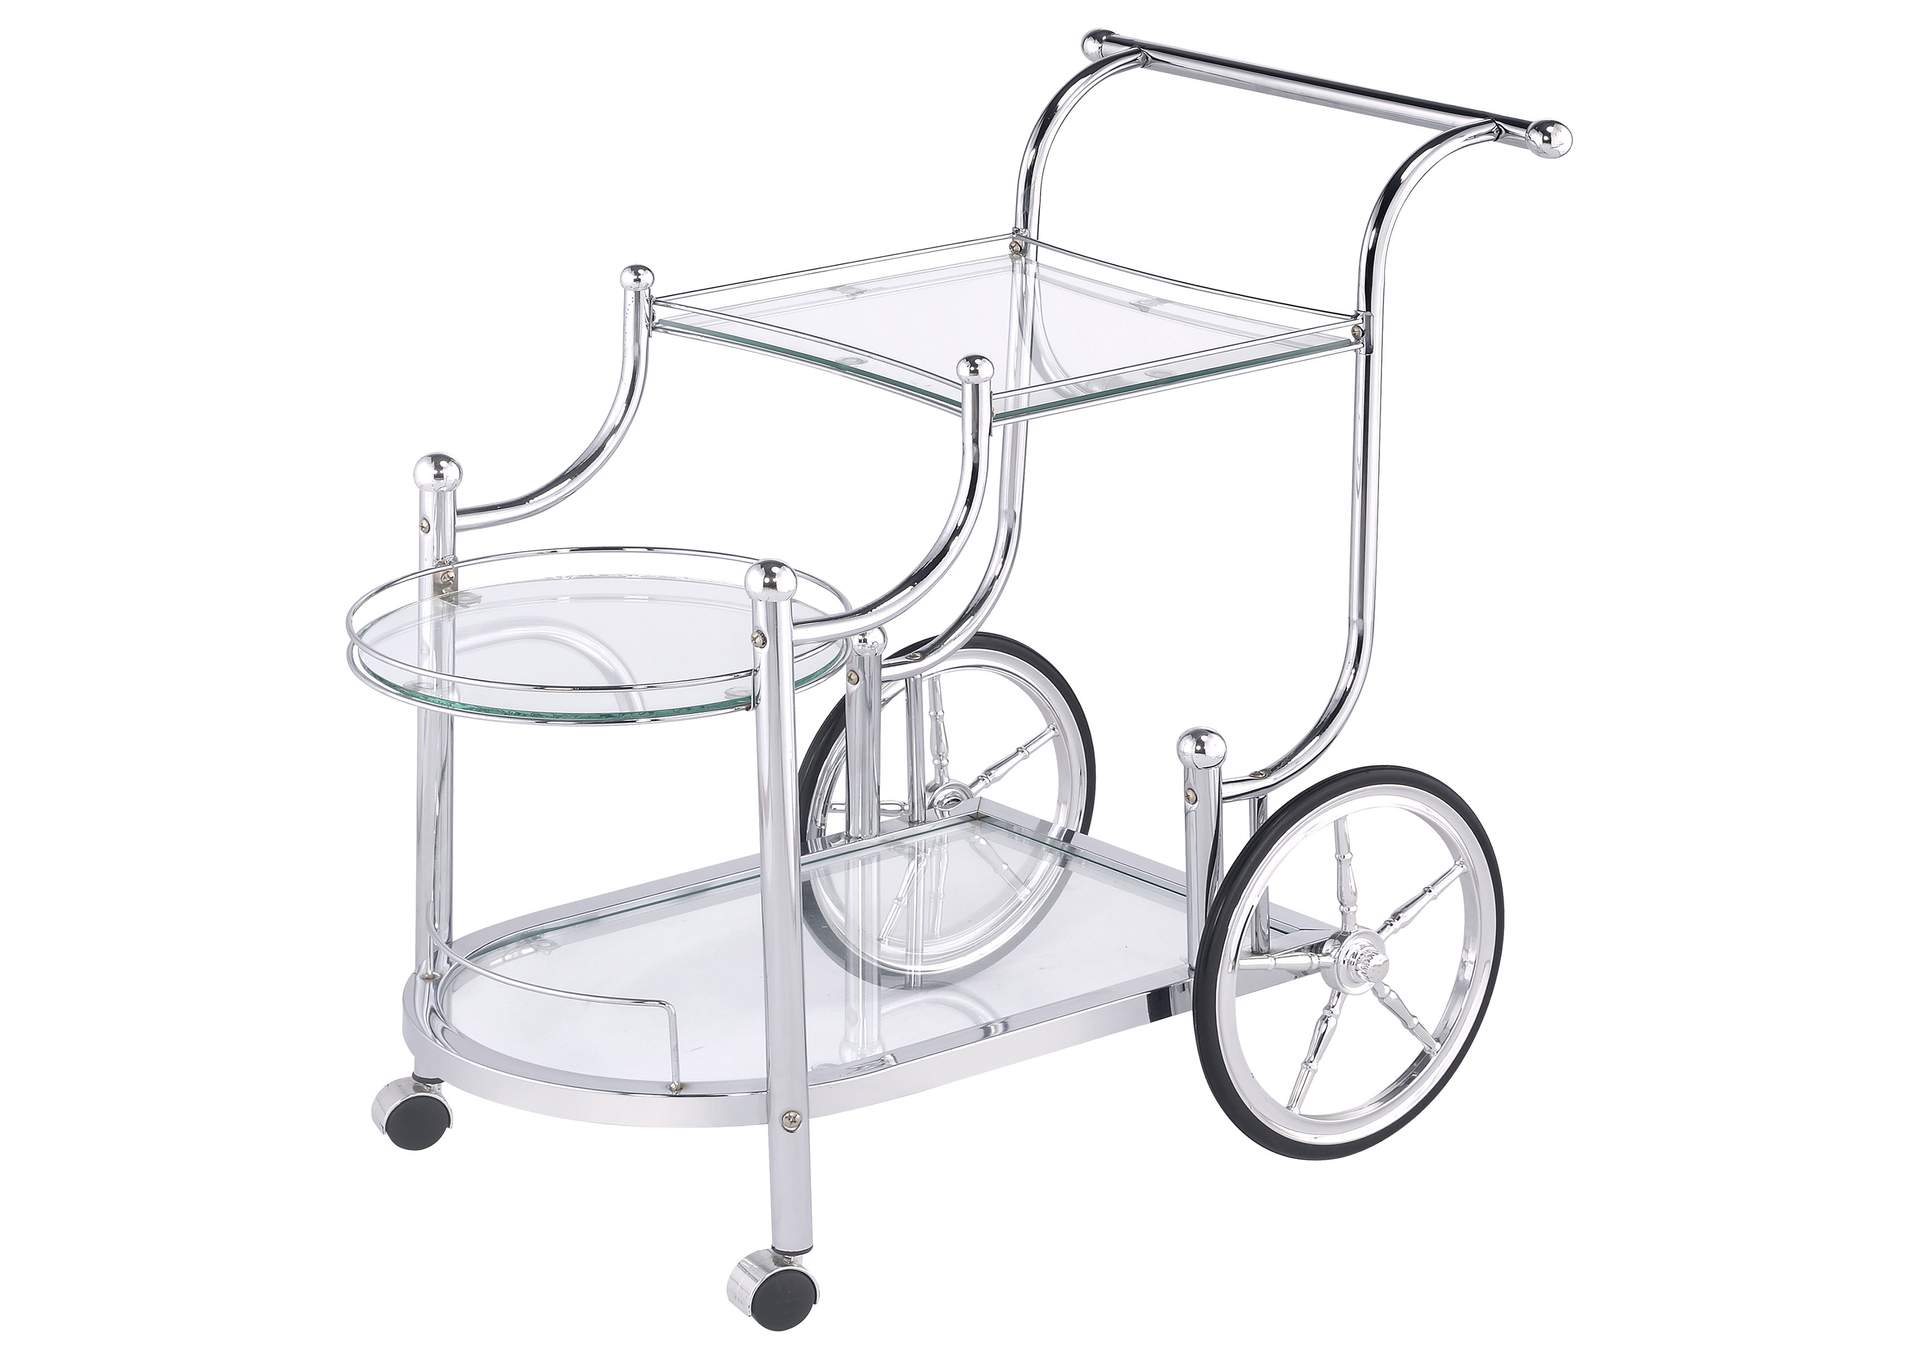 Sarandon 3-tier Serving Cart Chrome and Clear,Coaster Furniture